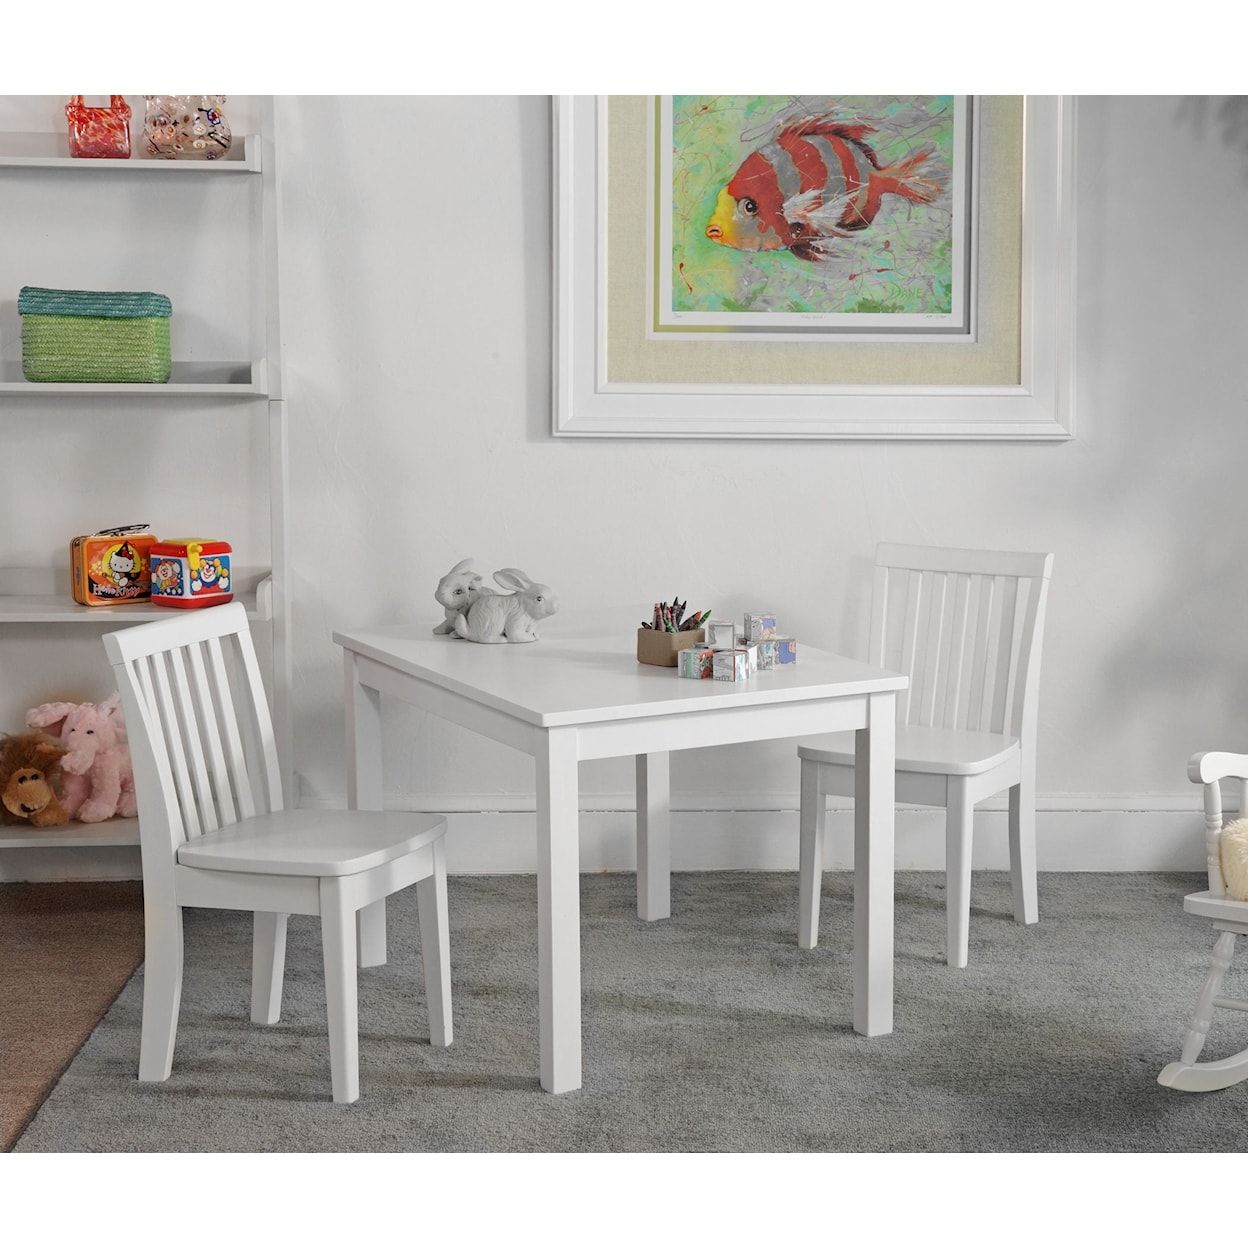 John Thomas Home Accents Juvenile Table and Chairs in White